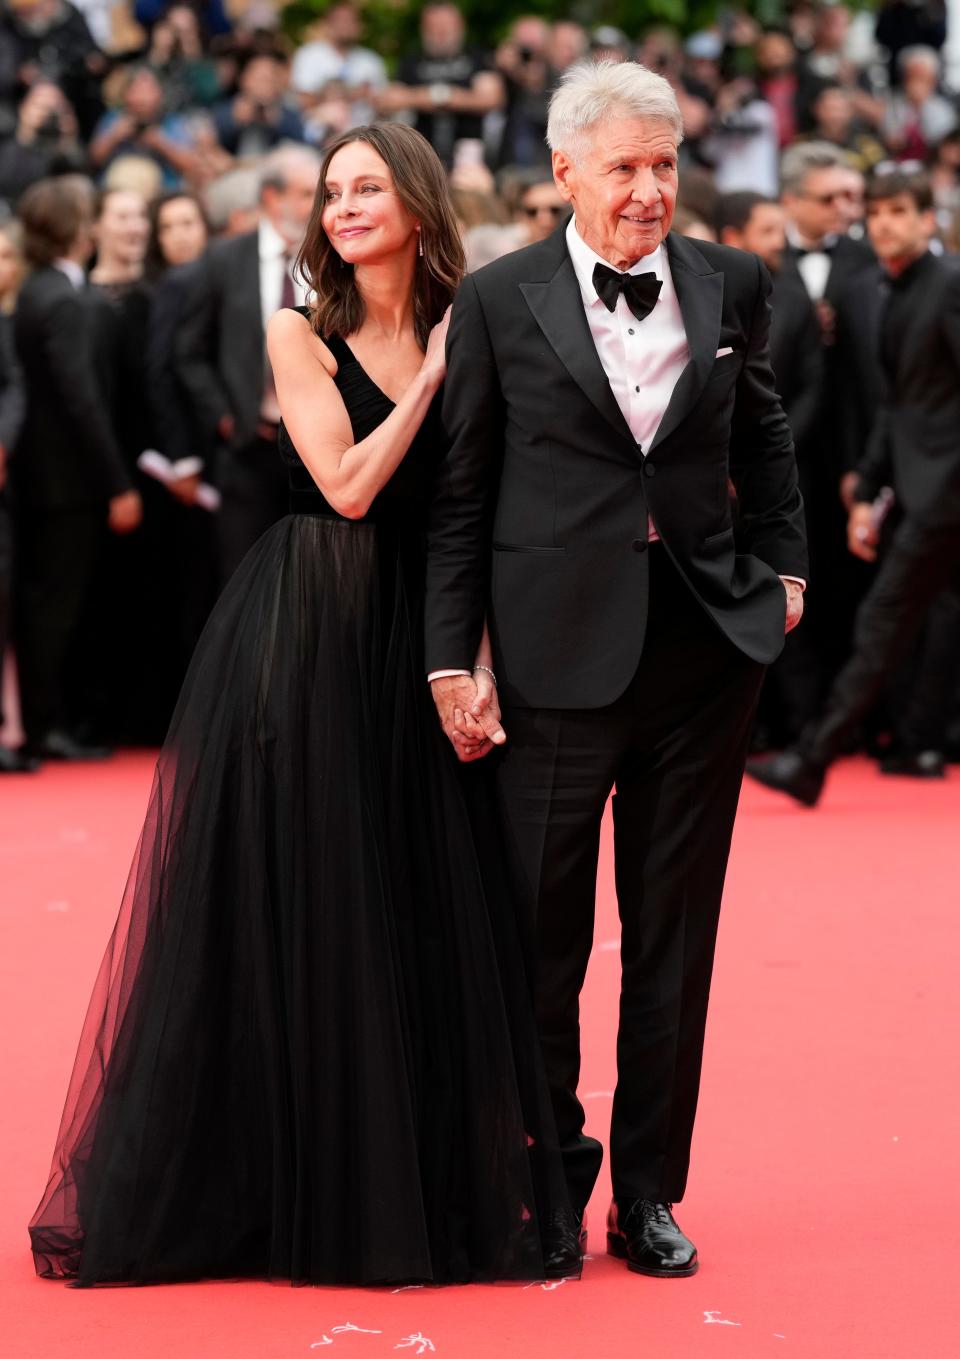 Calista Flockhart and Harrison Ford pose for photographers at Cannes.